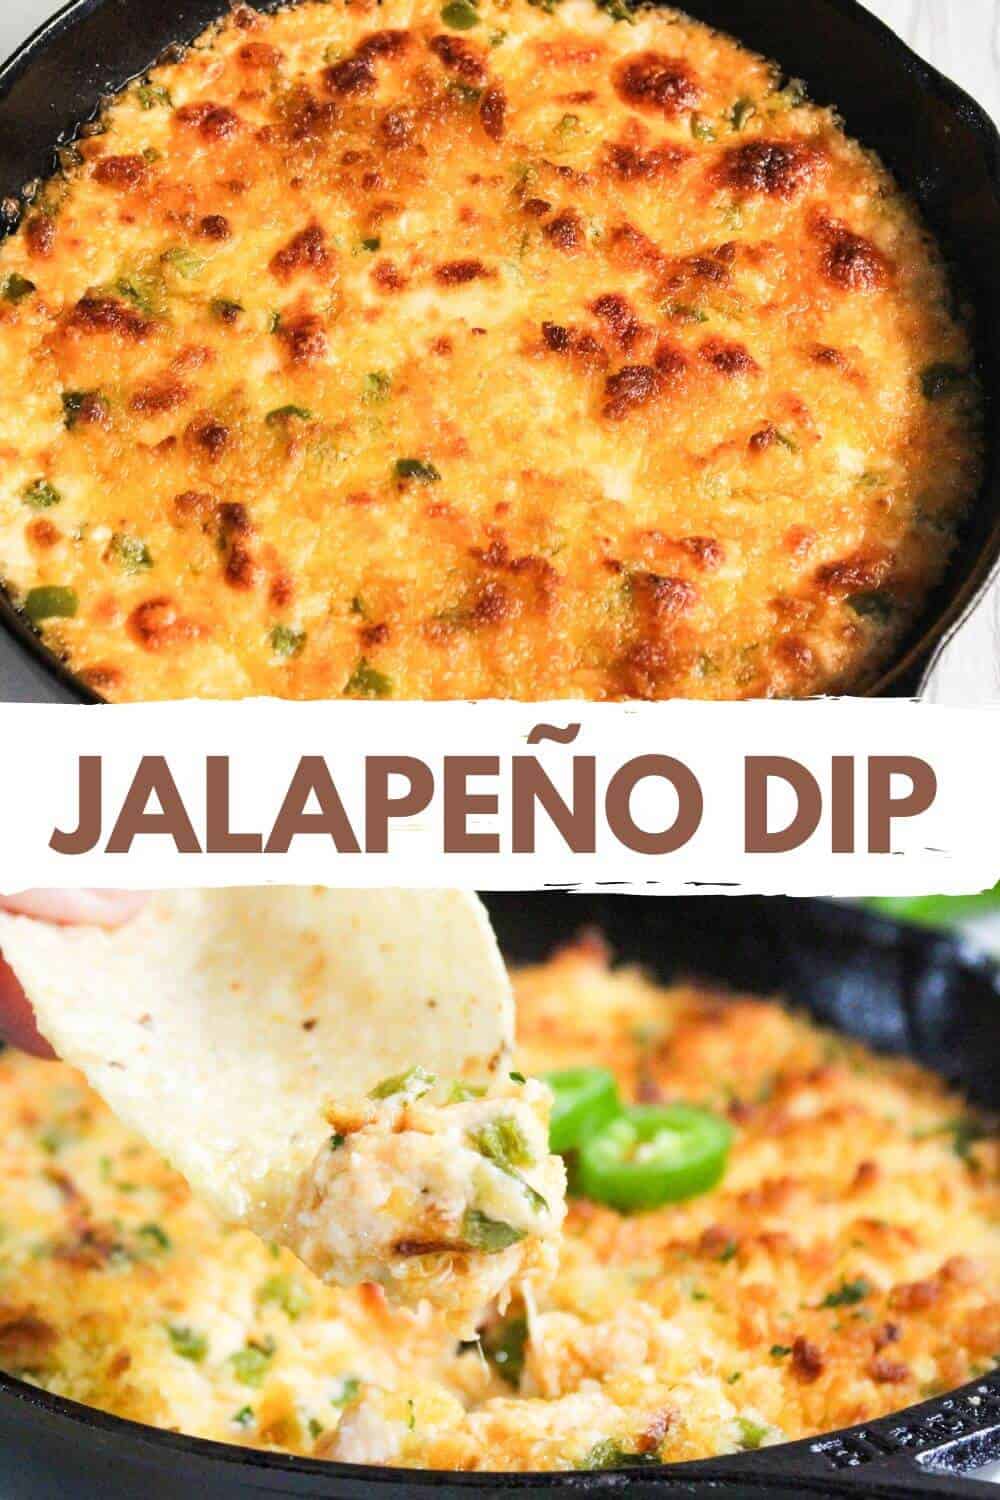 Jalapeno dip in a skillet with a tortilla.